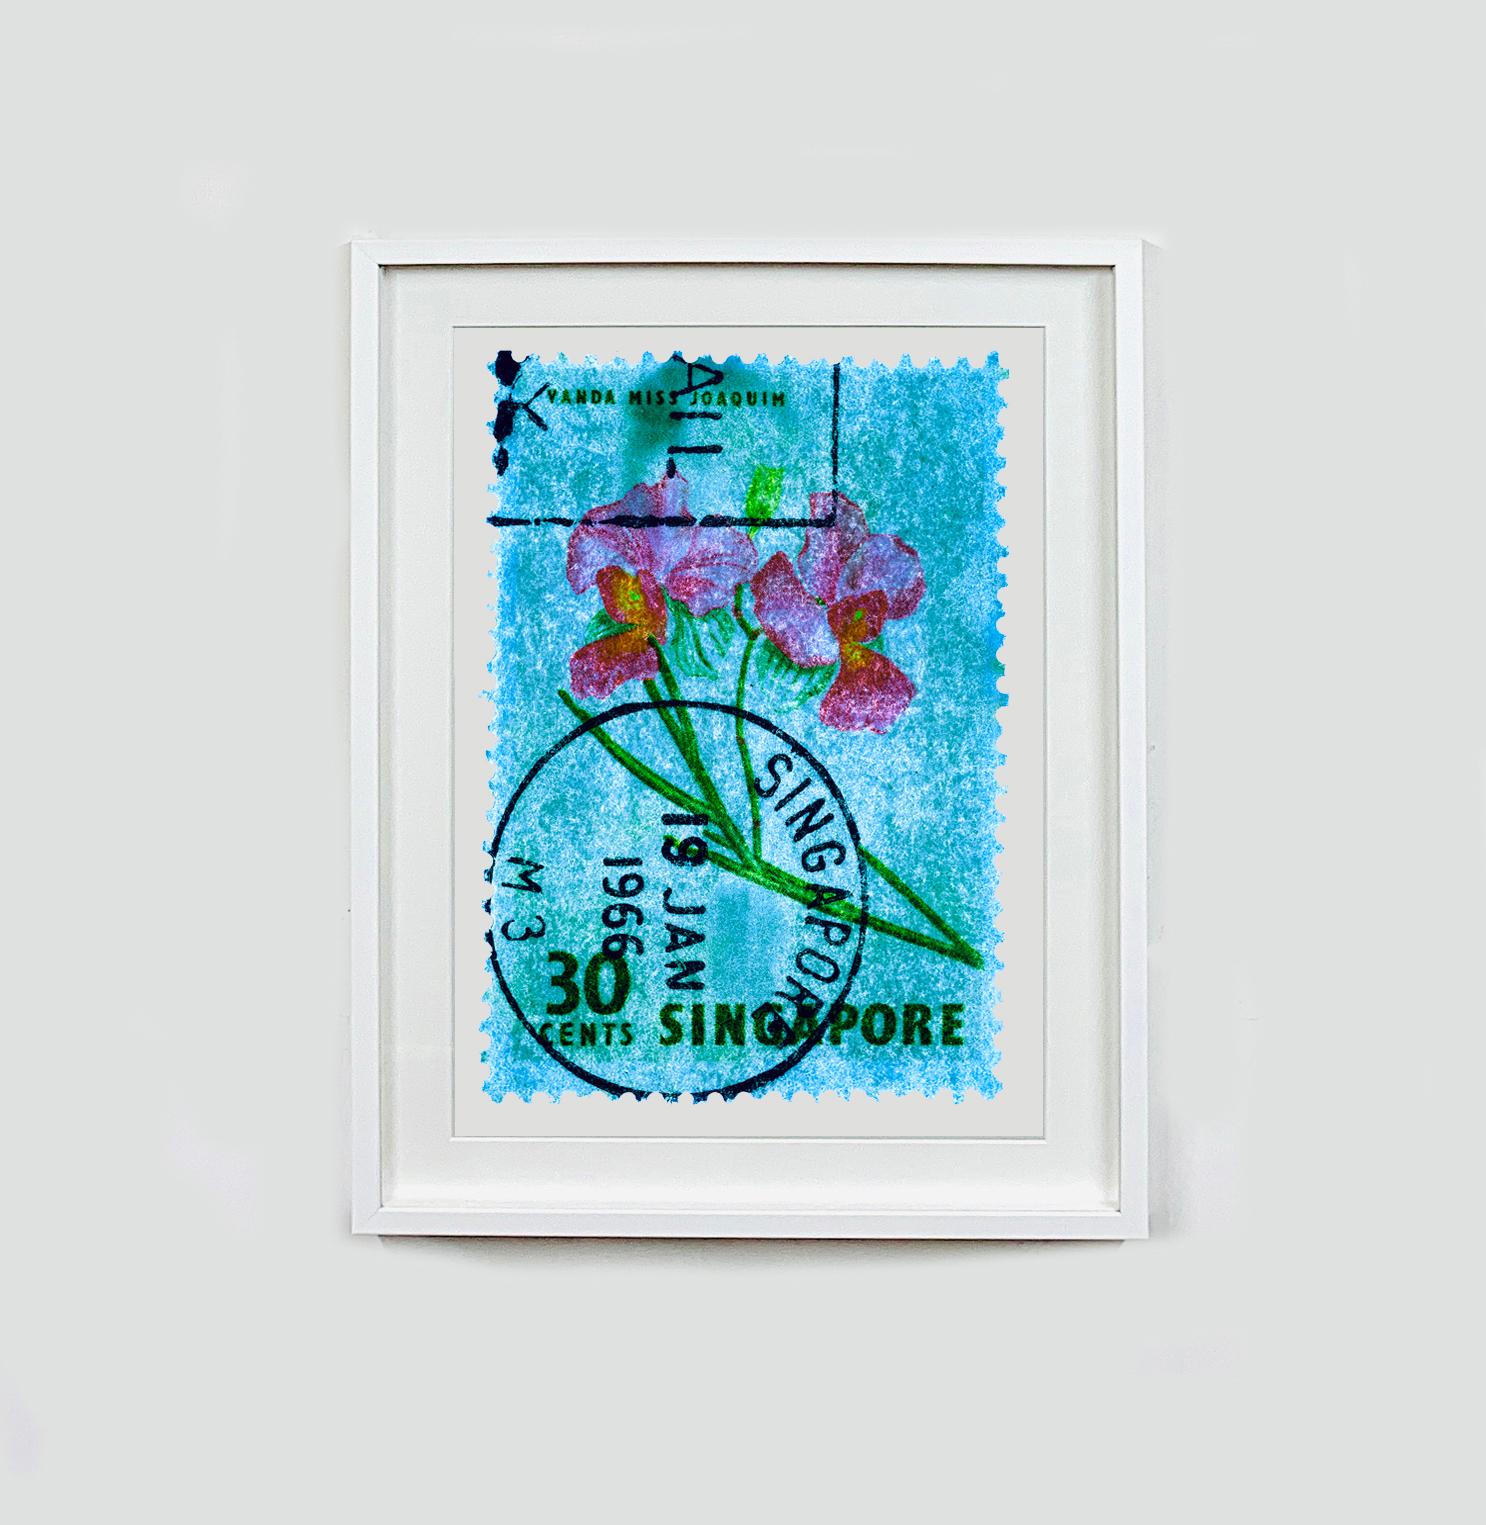 Singapore Stamp Collection, 30c Singapore Orchid Blue - Floral color photo - Pop Art Photograph by Heidler & Heeps